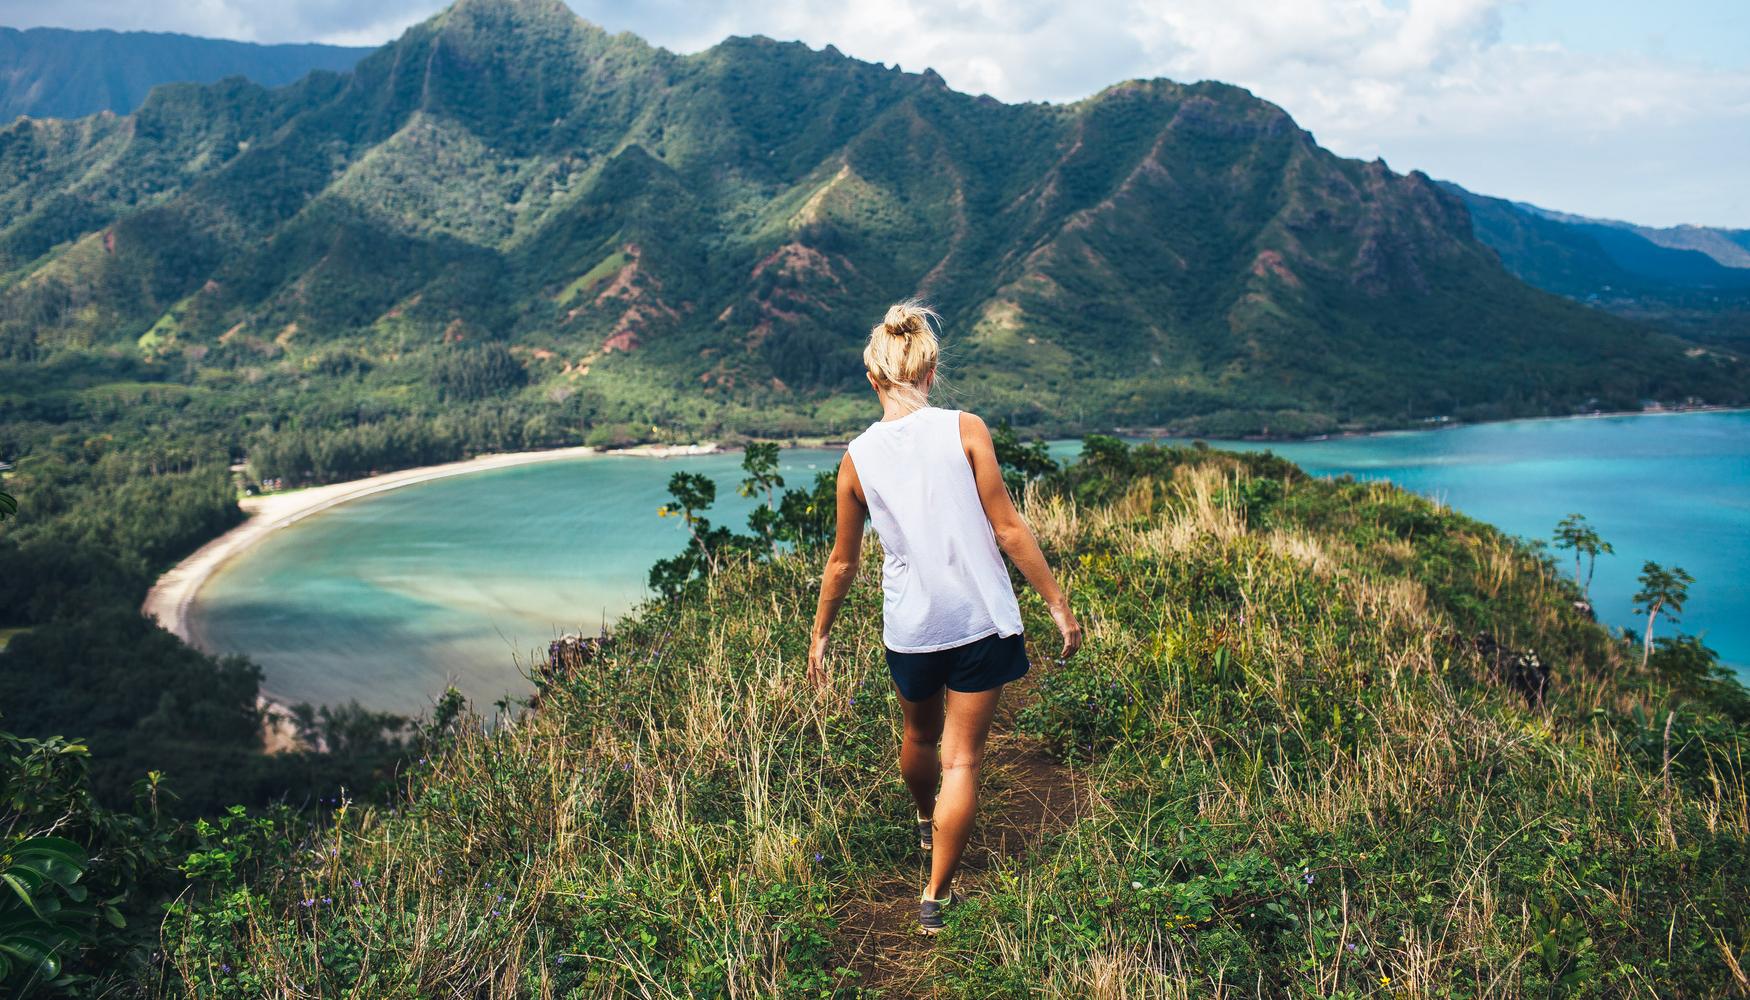 Holidays in Hawaii from £1,063 Search Flight+Hotel on KAYAK